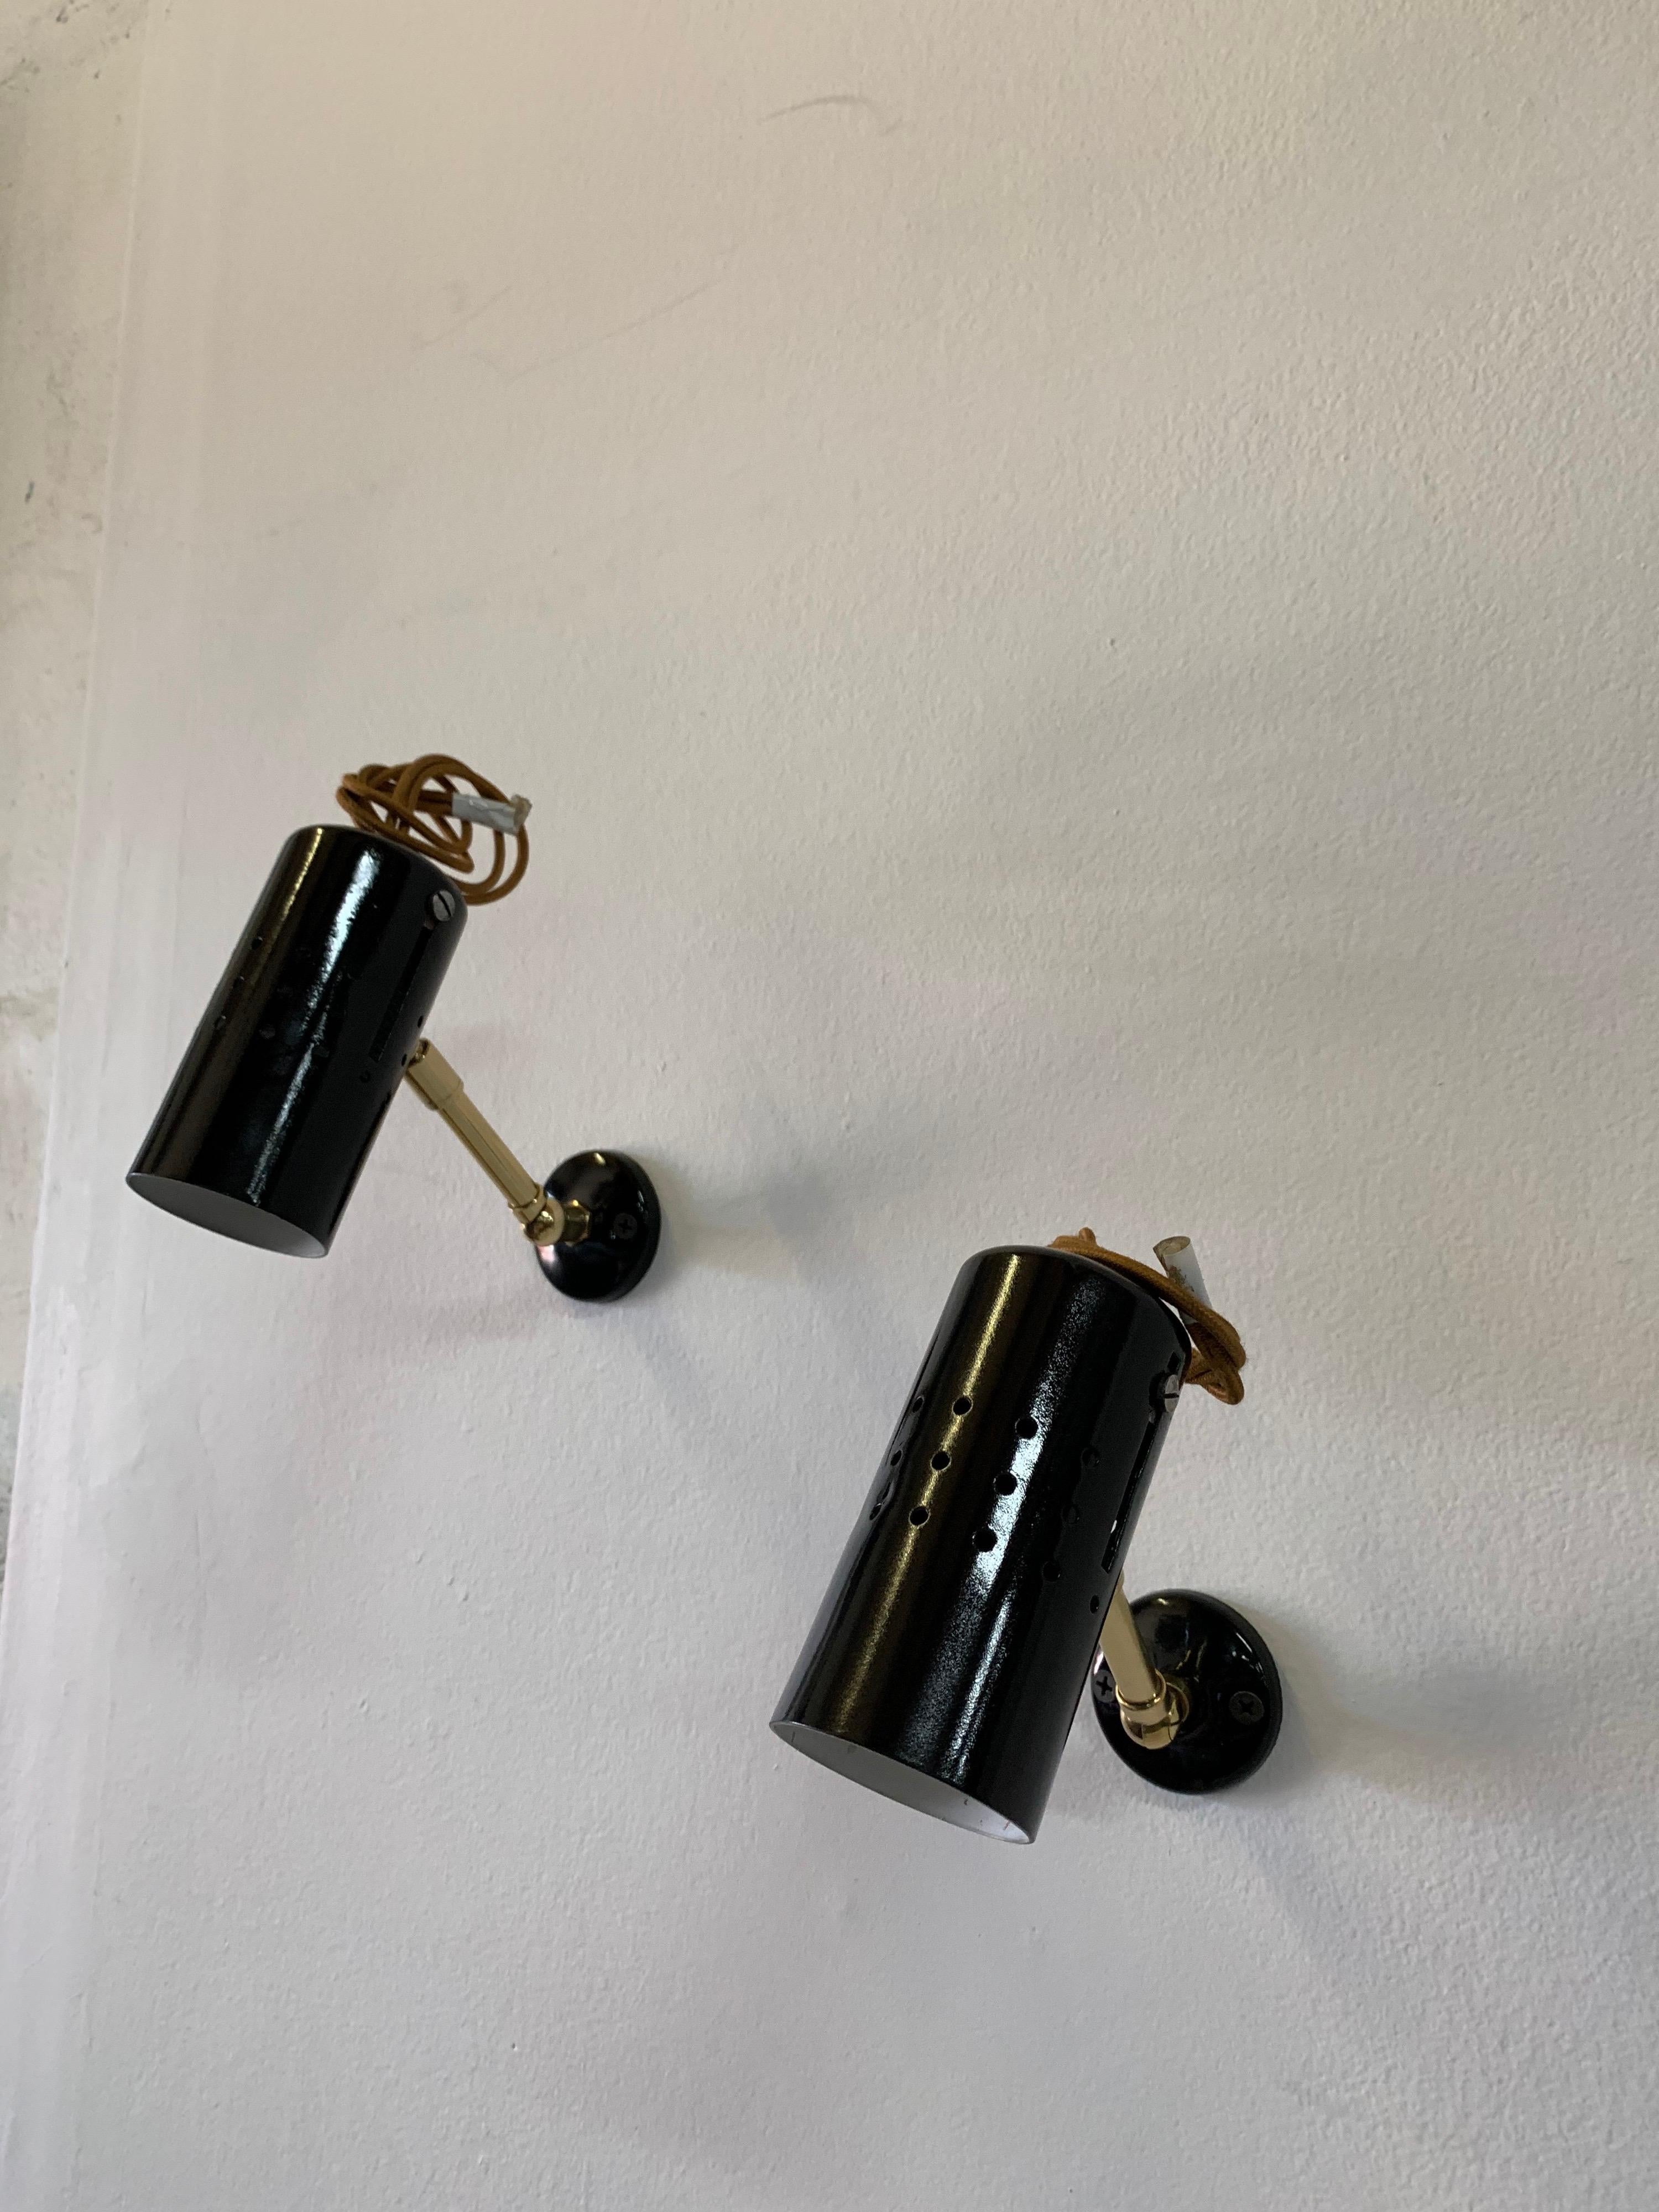 Vintage French Petite Spot Lights/ Wall Sconces, Pair For Sale 2